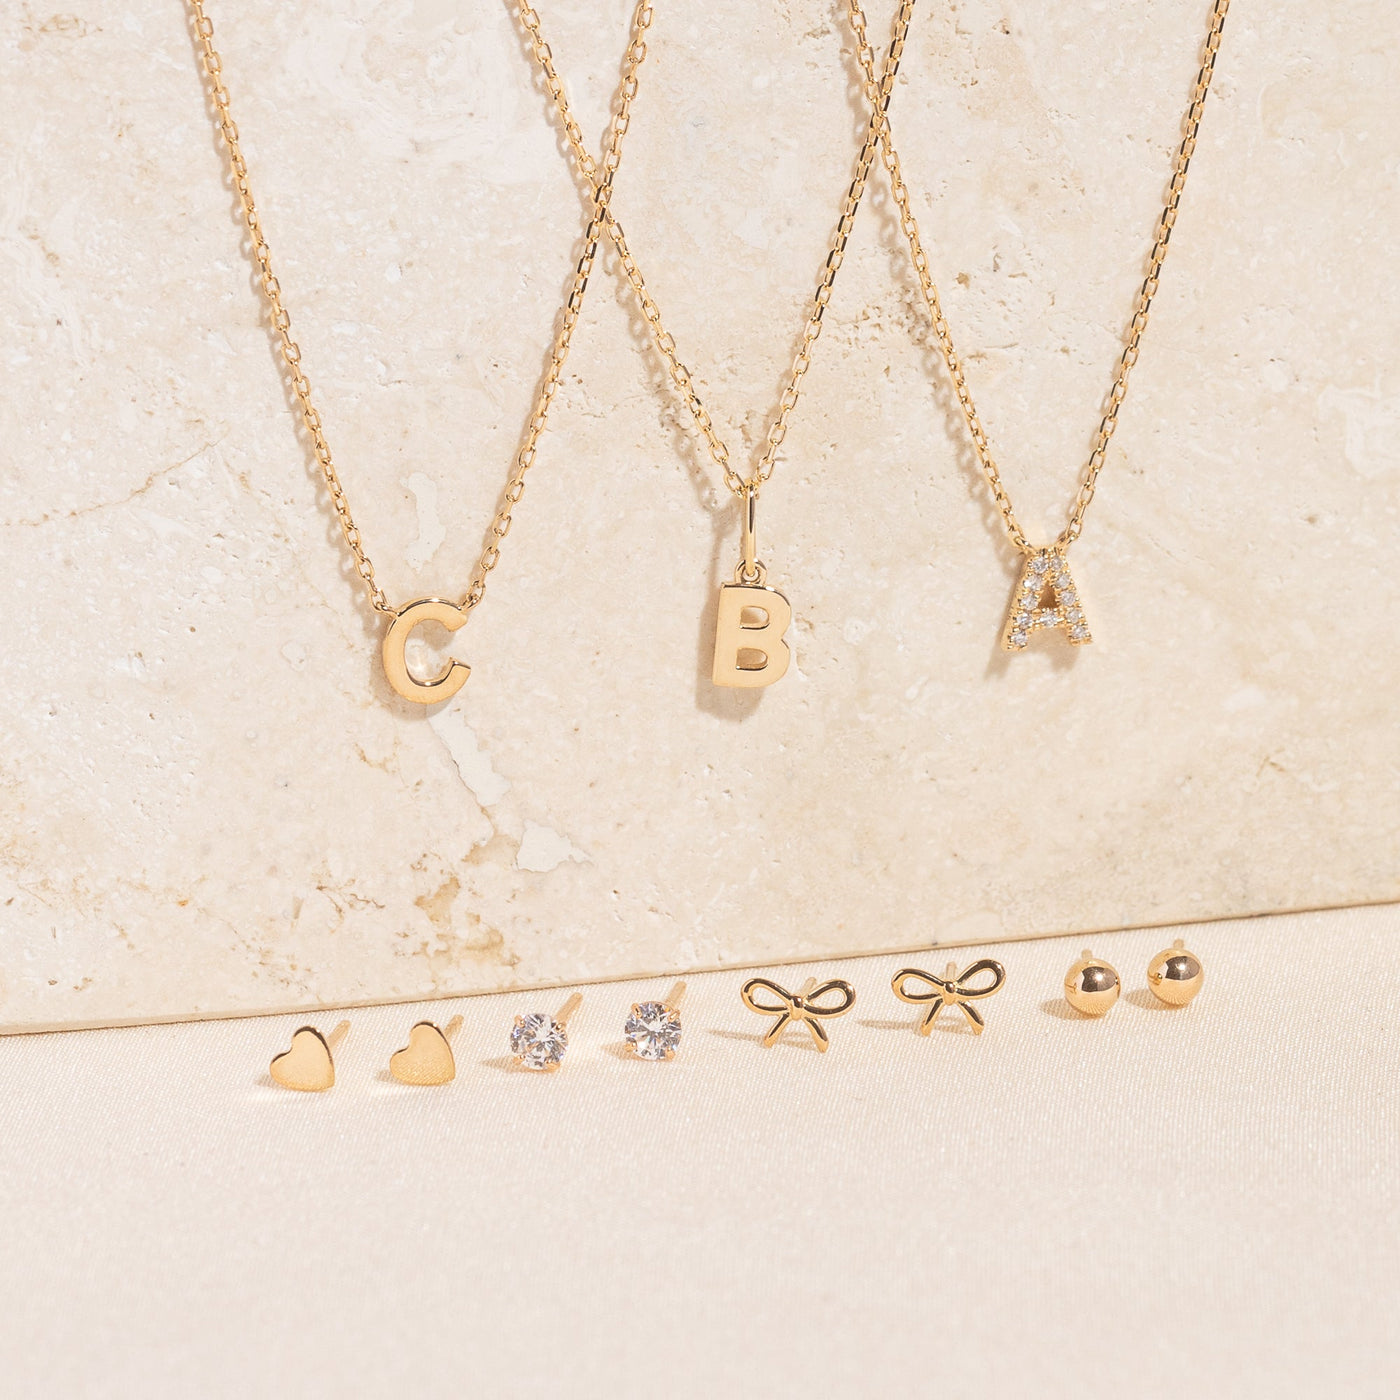 A B C D E F G H I J K L M N O P Q R S T U V W X Y Z Tiny Initial Necklace - 14k Solid Gold